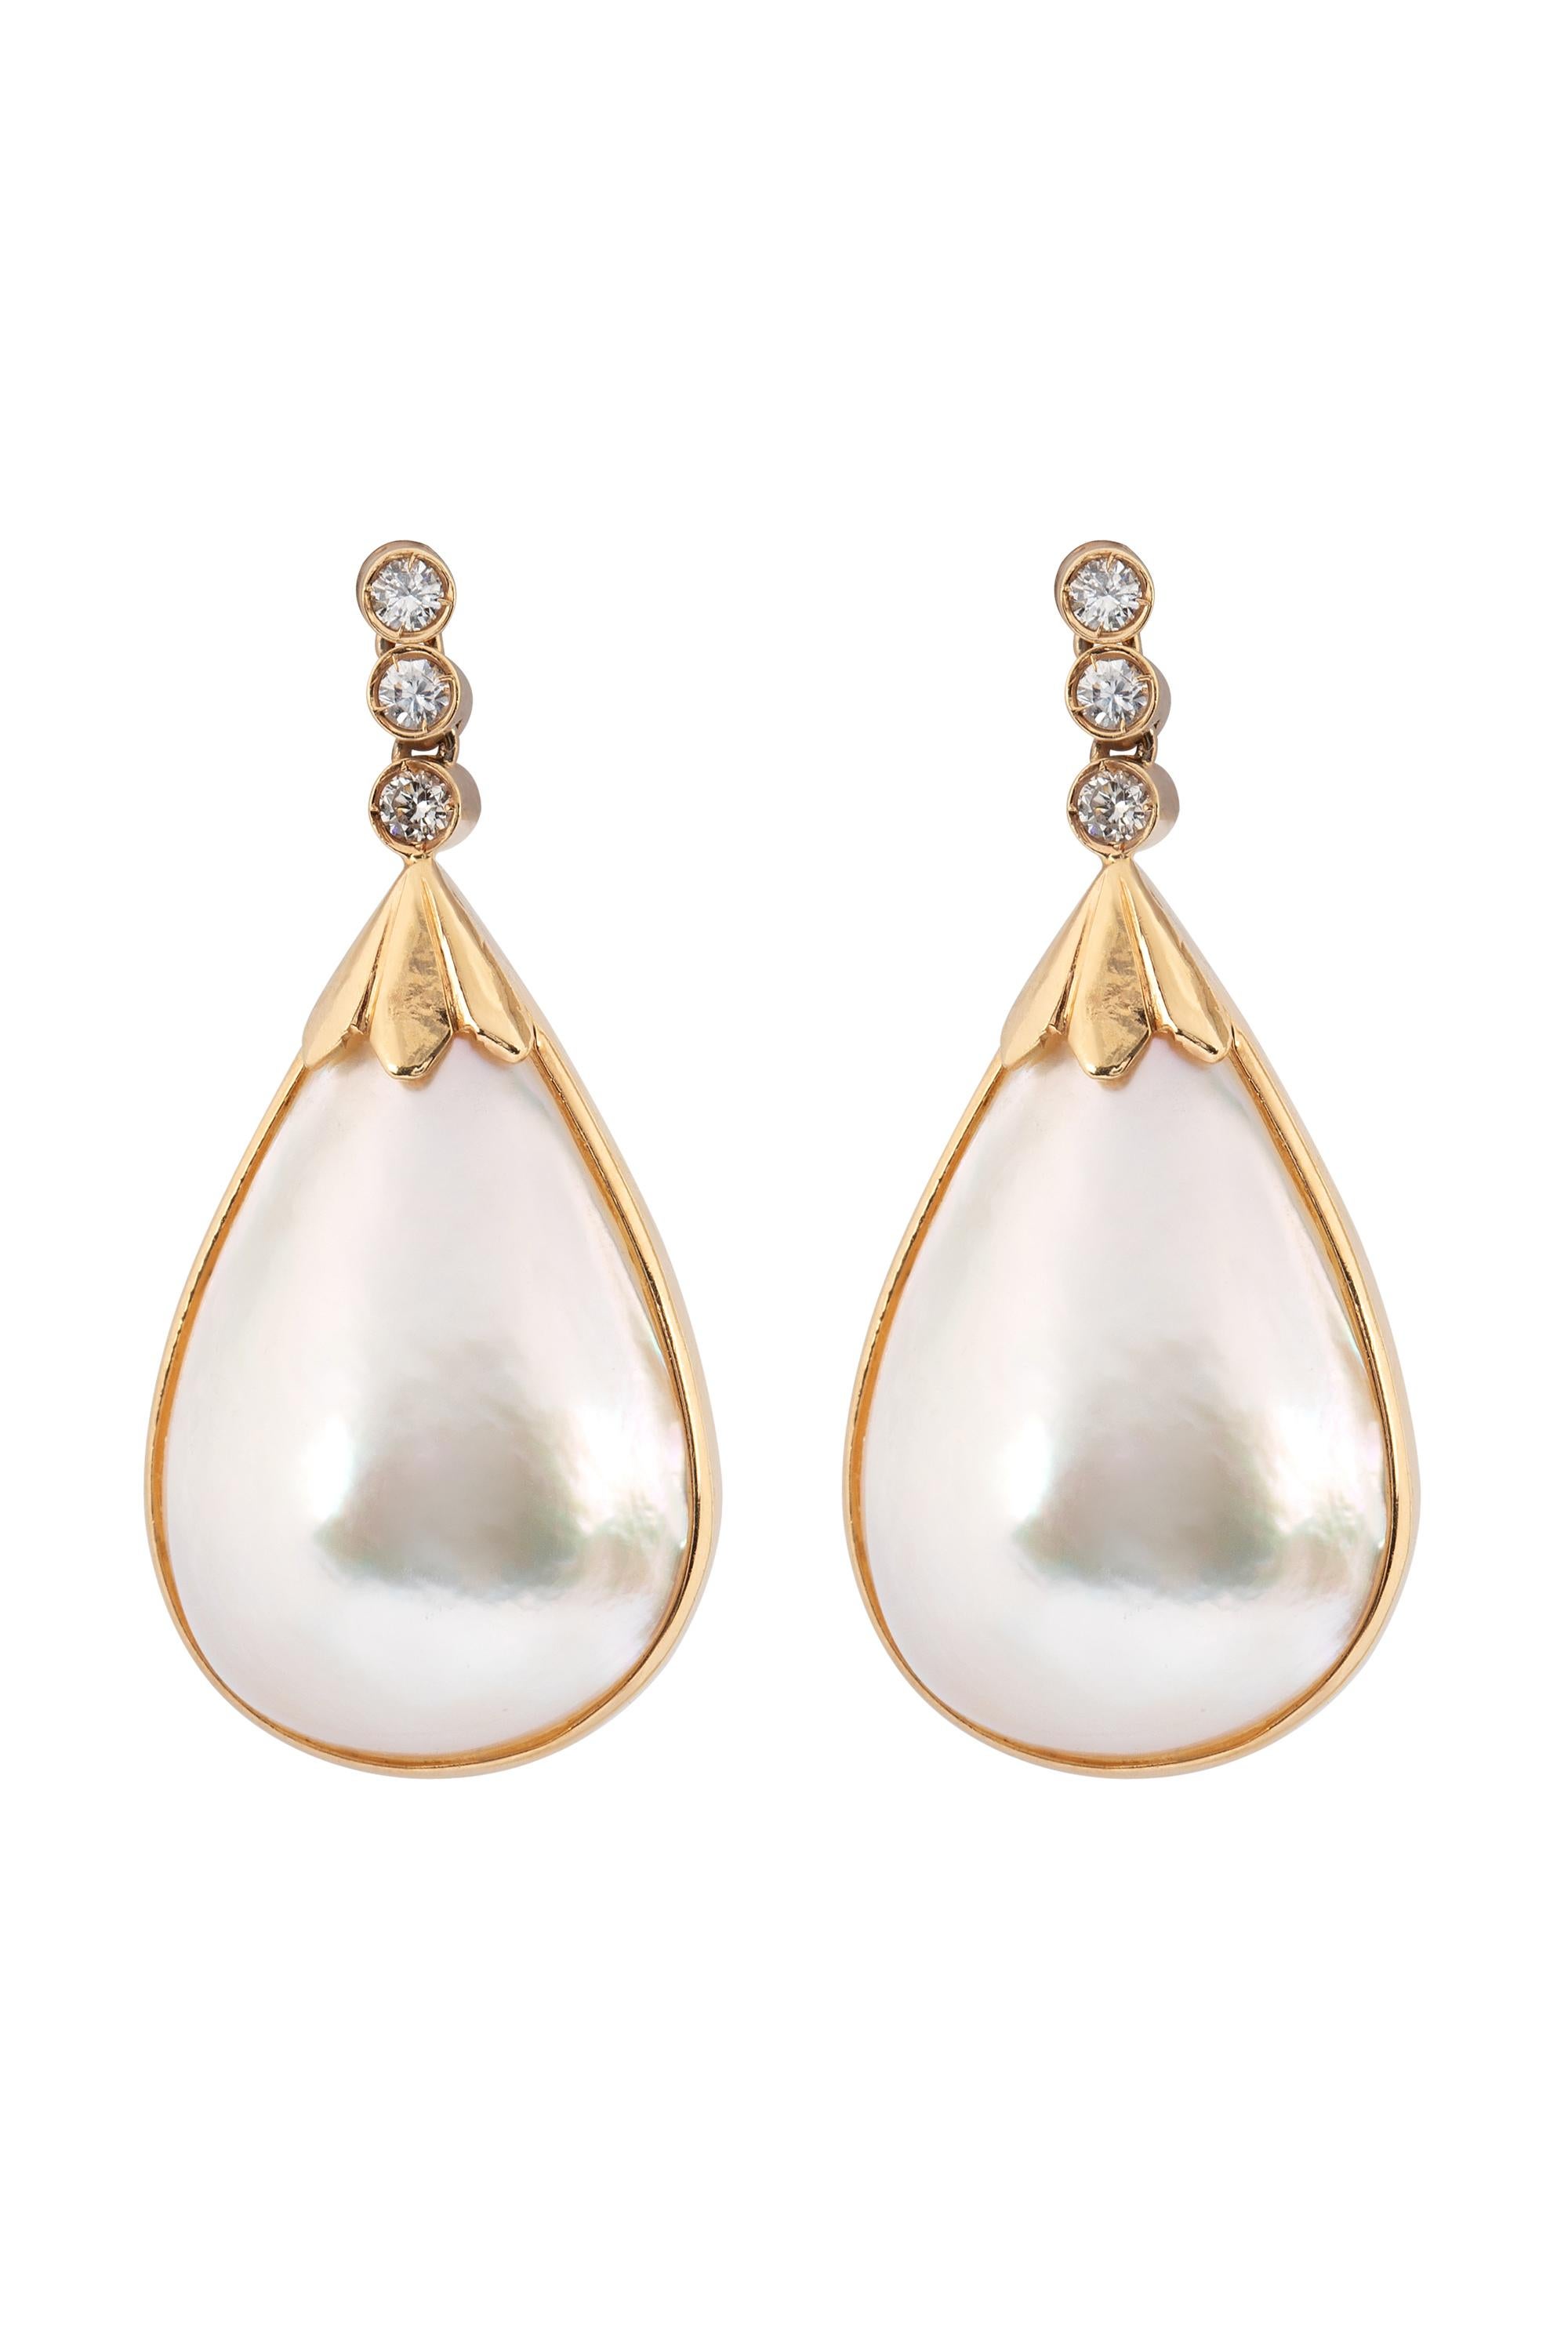 Round Cut Vintage Mabé Pearl and Diamond Drop Earrings For Sale